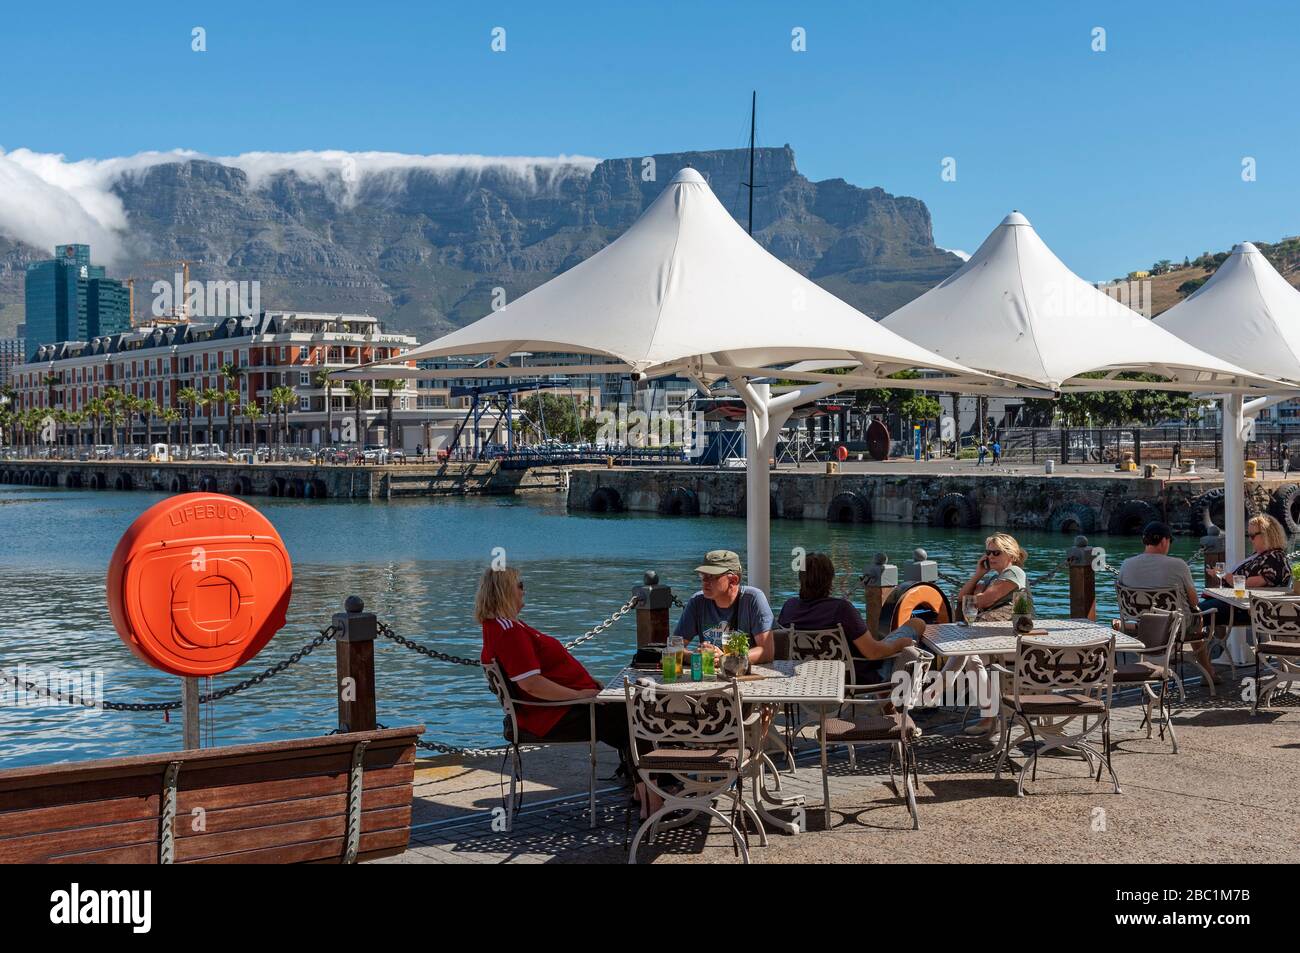 Cape Town, South Africa. 2019. Landcape view of the waterfront with tourists eating and drinking and cloud creeping over the summit of Table Mountain. Stock Photo